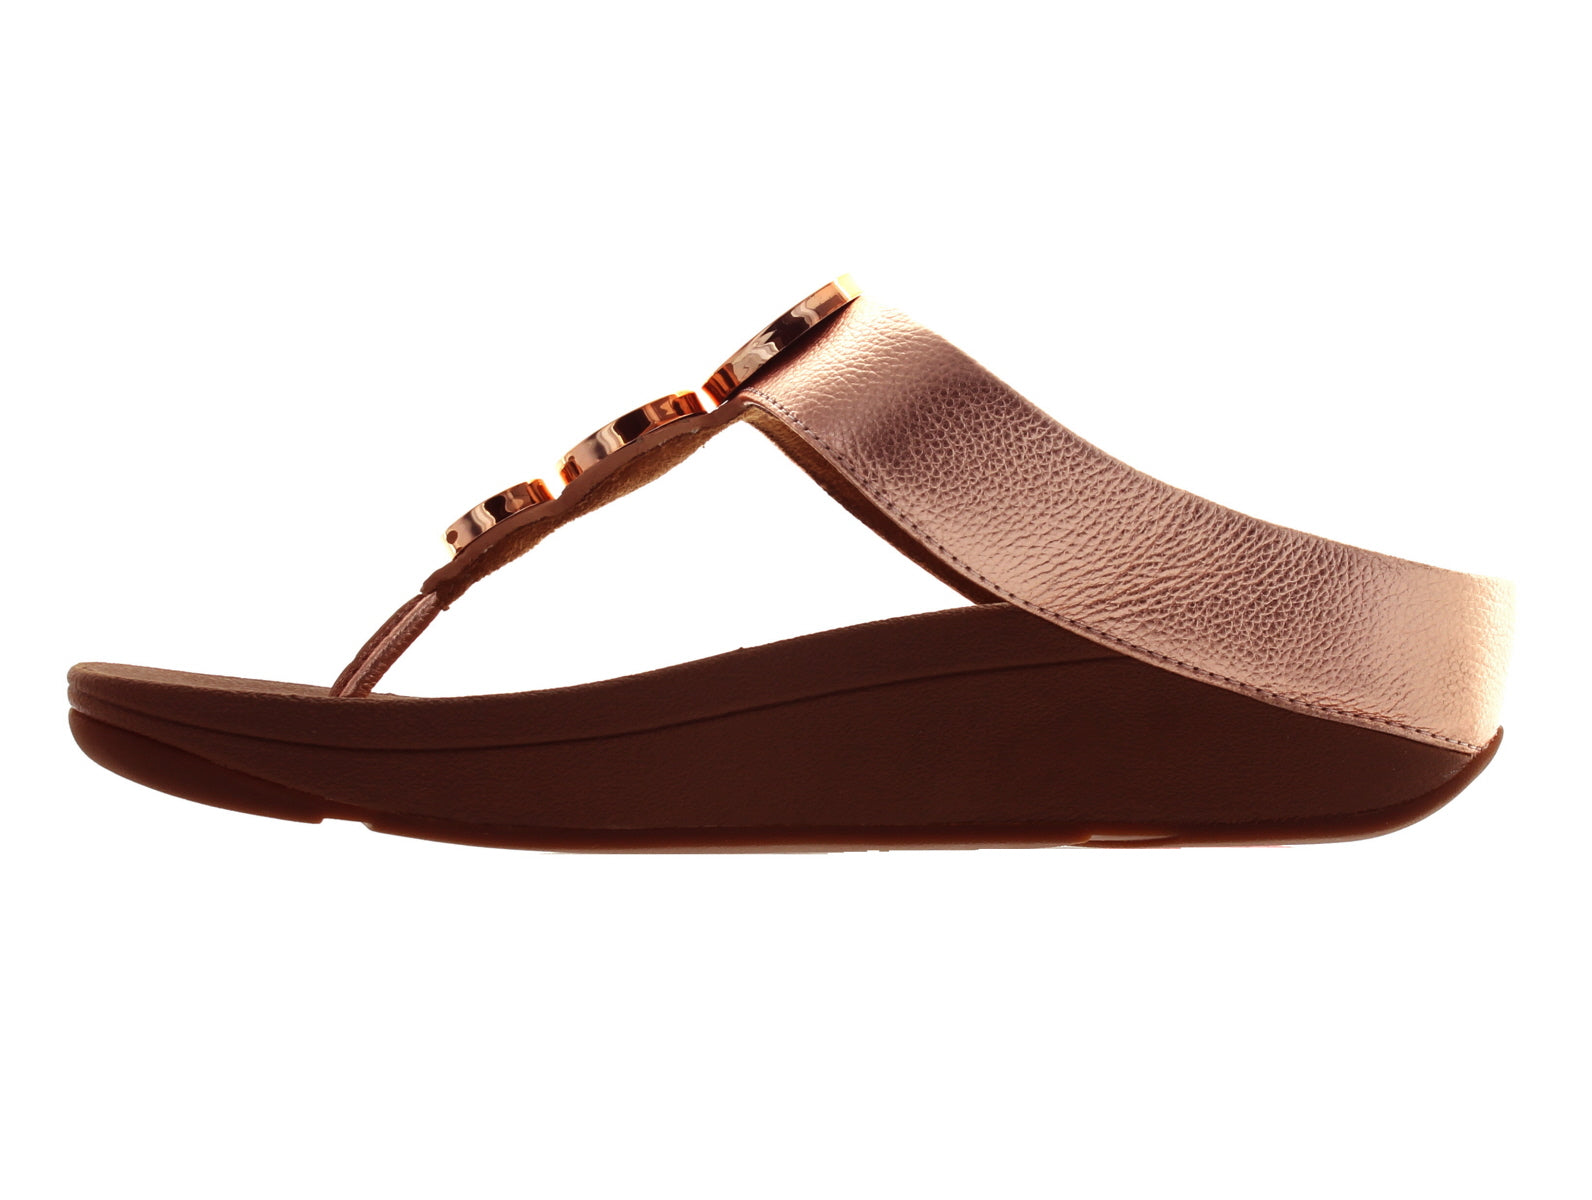 Ladies sandals at Walsh Brothers Shoes